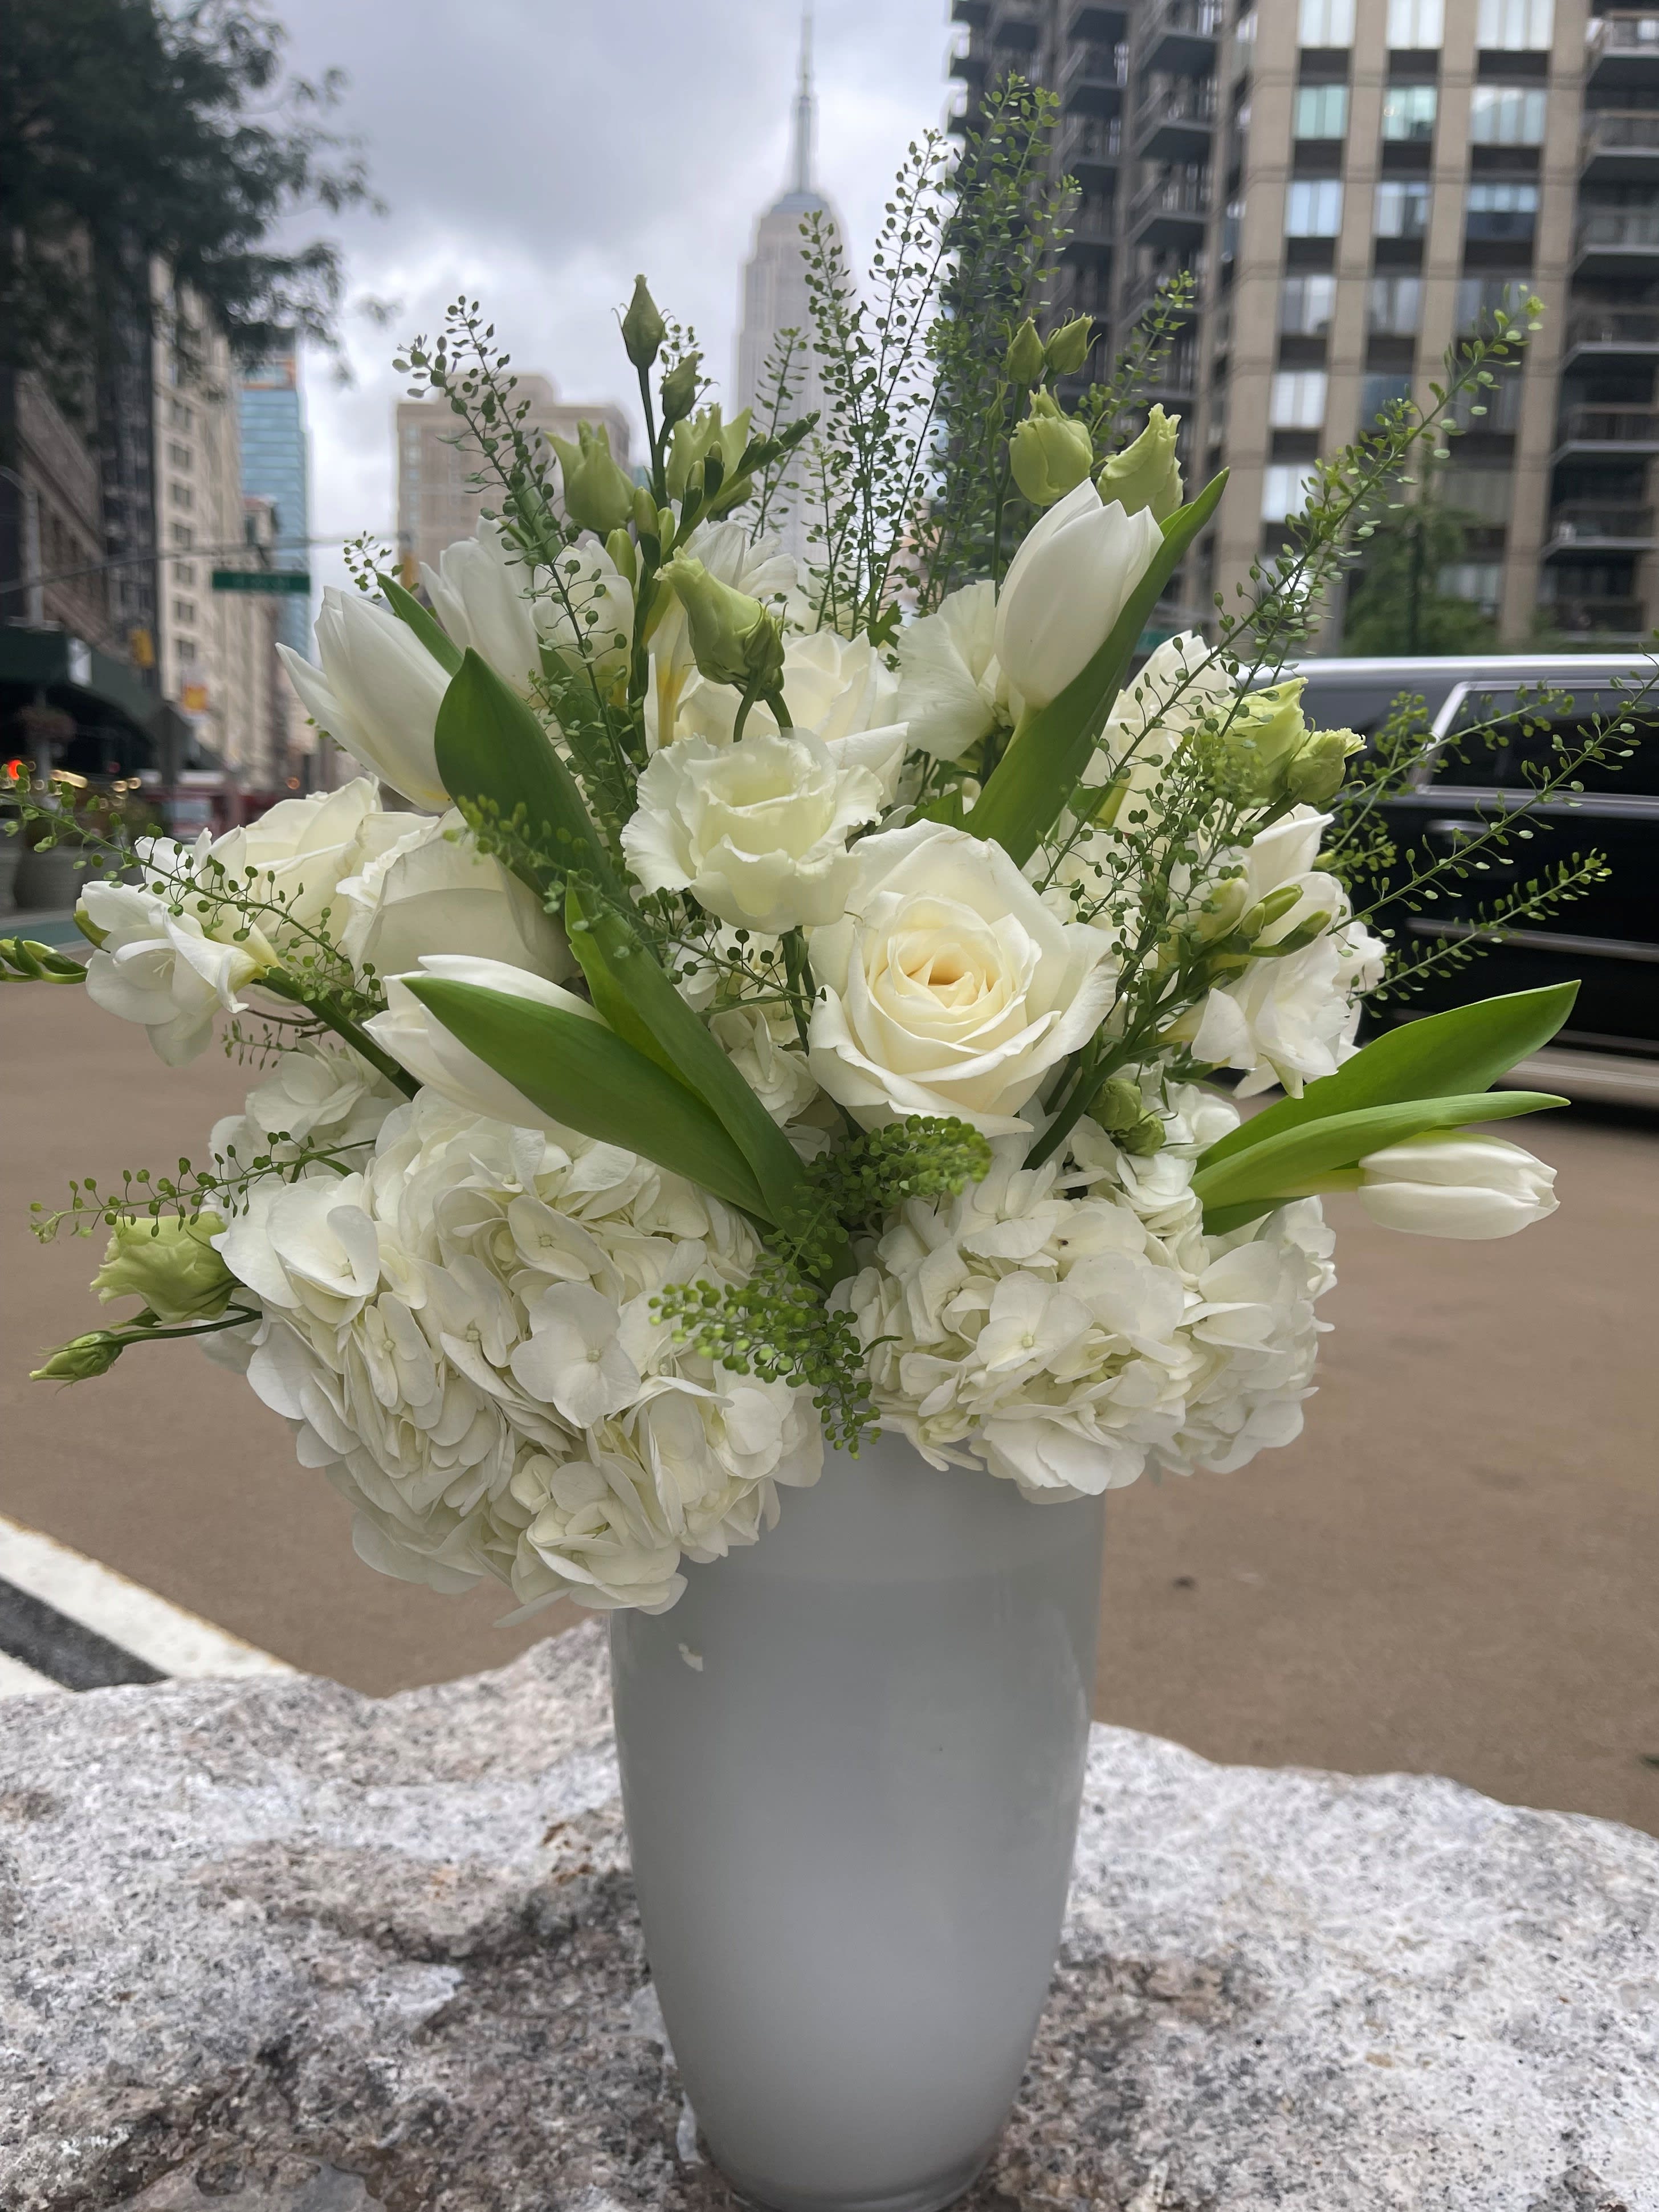 bloom143 - white arrangement: Standard Option is as shown in the picture 